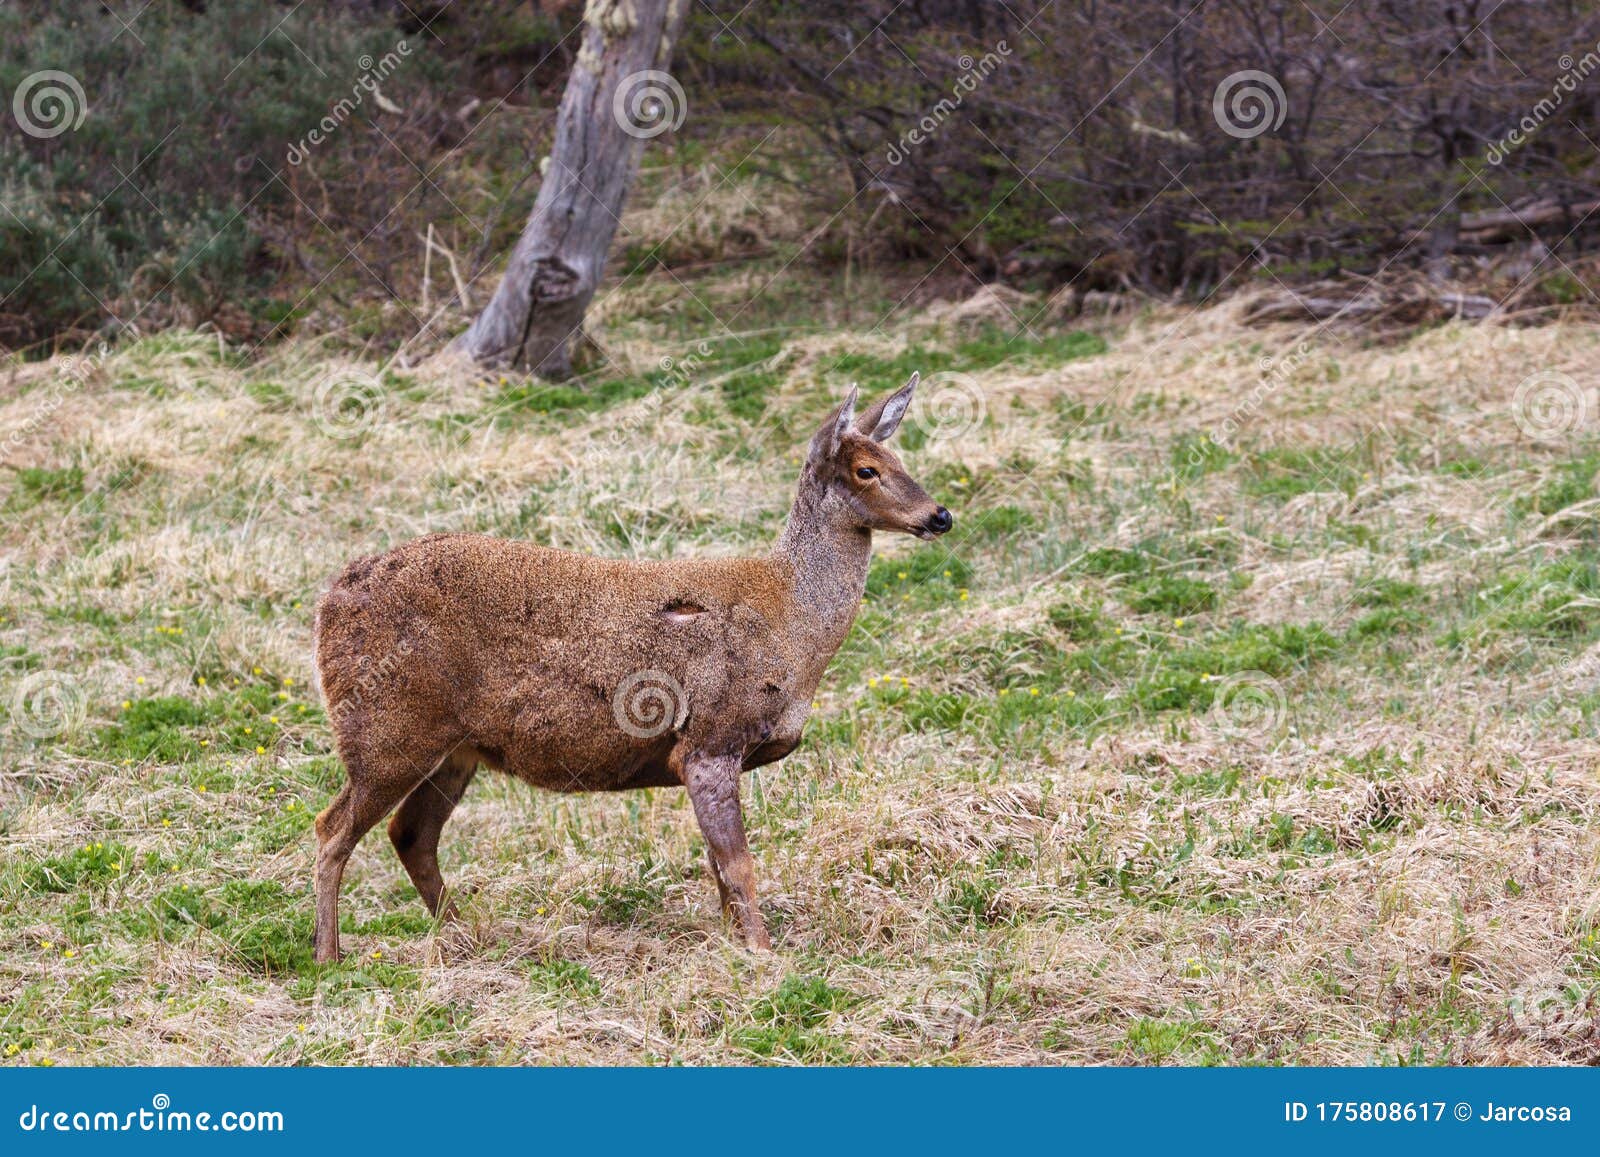 guemal, hippocamelus bisulcus, endangered specie also sometimes known as the south andean deer, huemul chileno